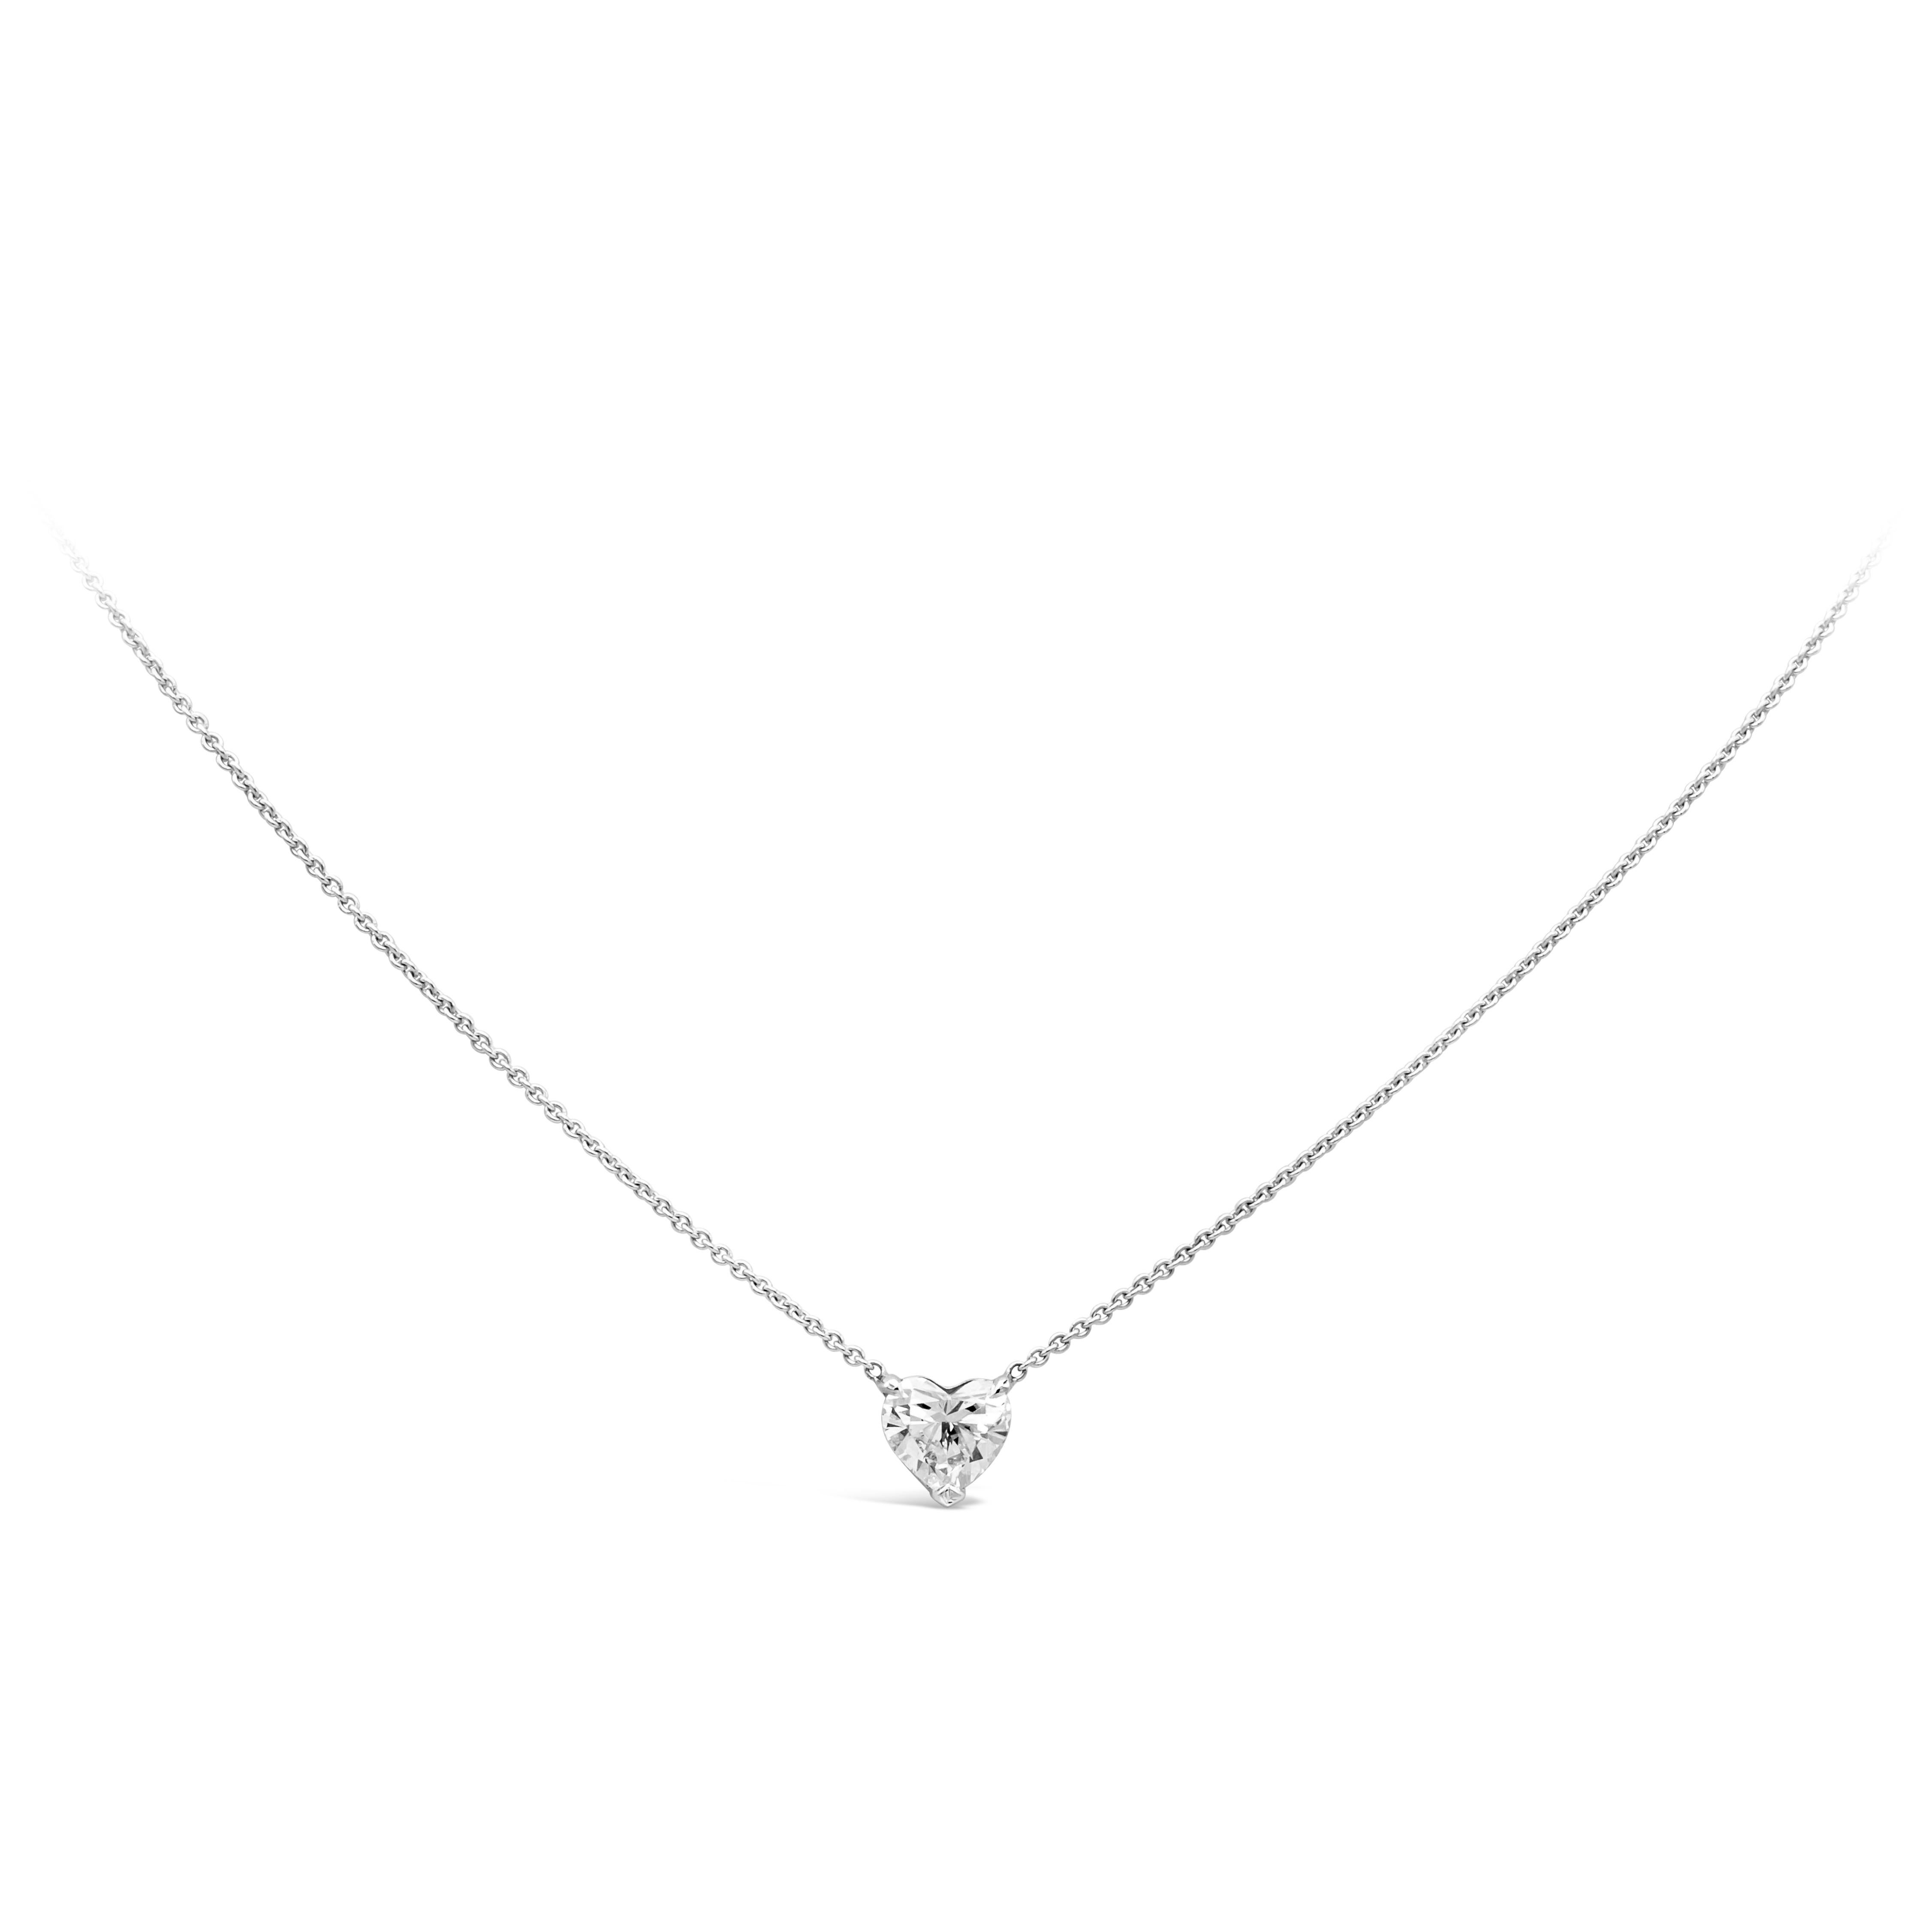 A classic pendant necklace showcasing a 1.05 carats heart shape diamond, set in a polished platinum basket mounting. Suspended on an 16 inch adjustable white gold chain.

Roman Malakov is a custom house, specializing in creating anything you can